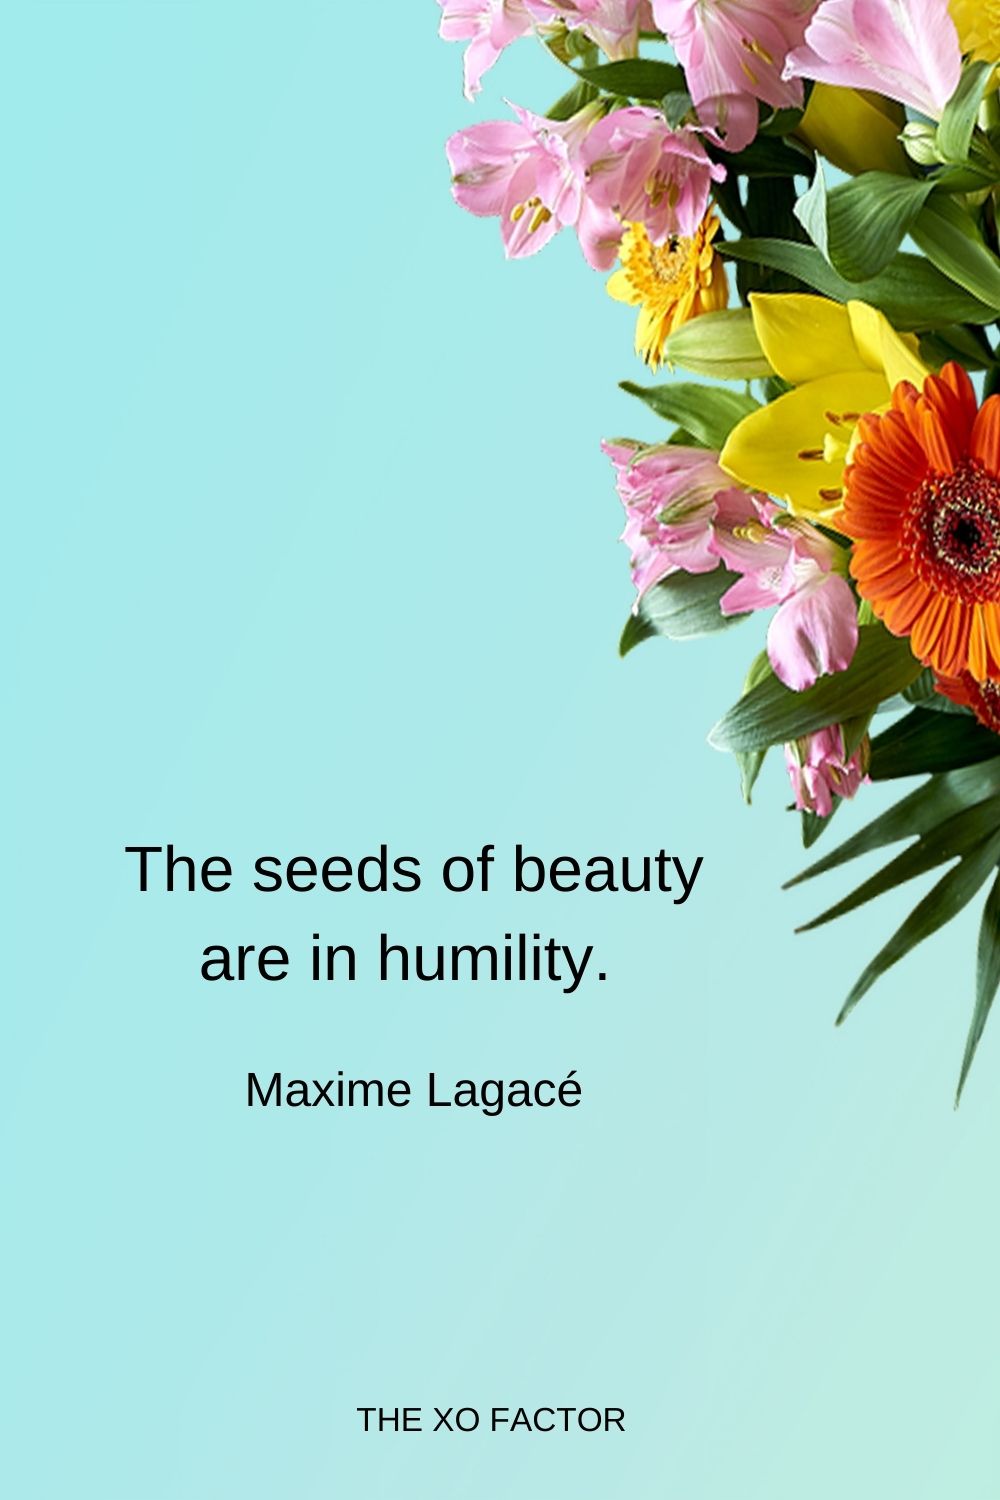 The seeds of beauty are in humility.  Maxime Lagacé